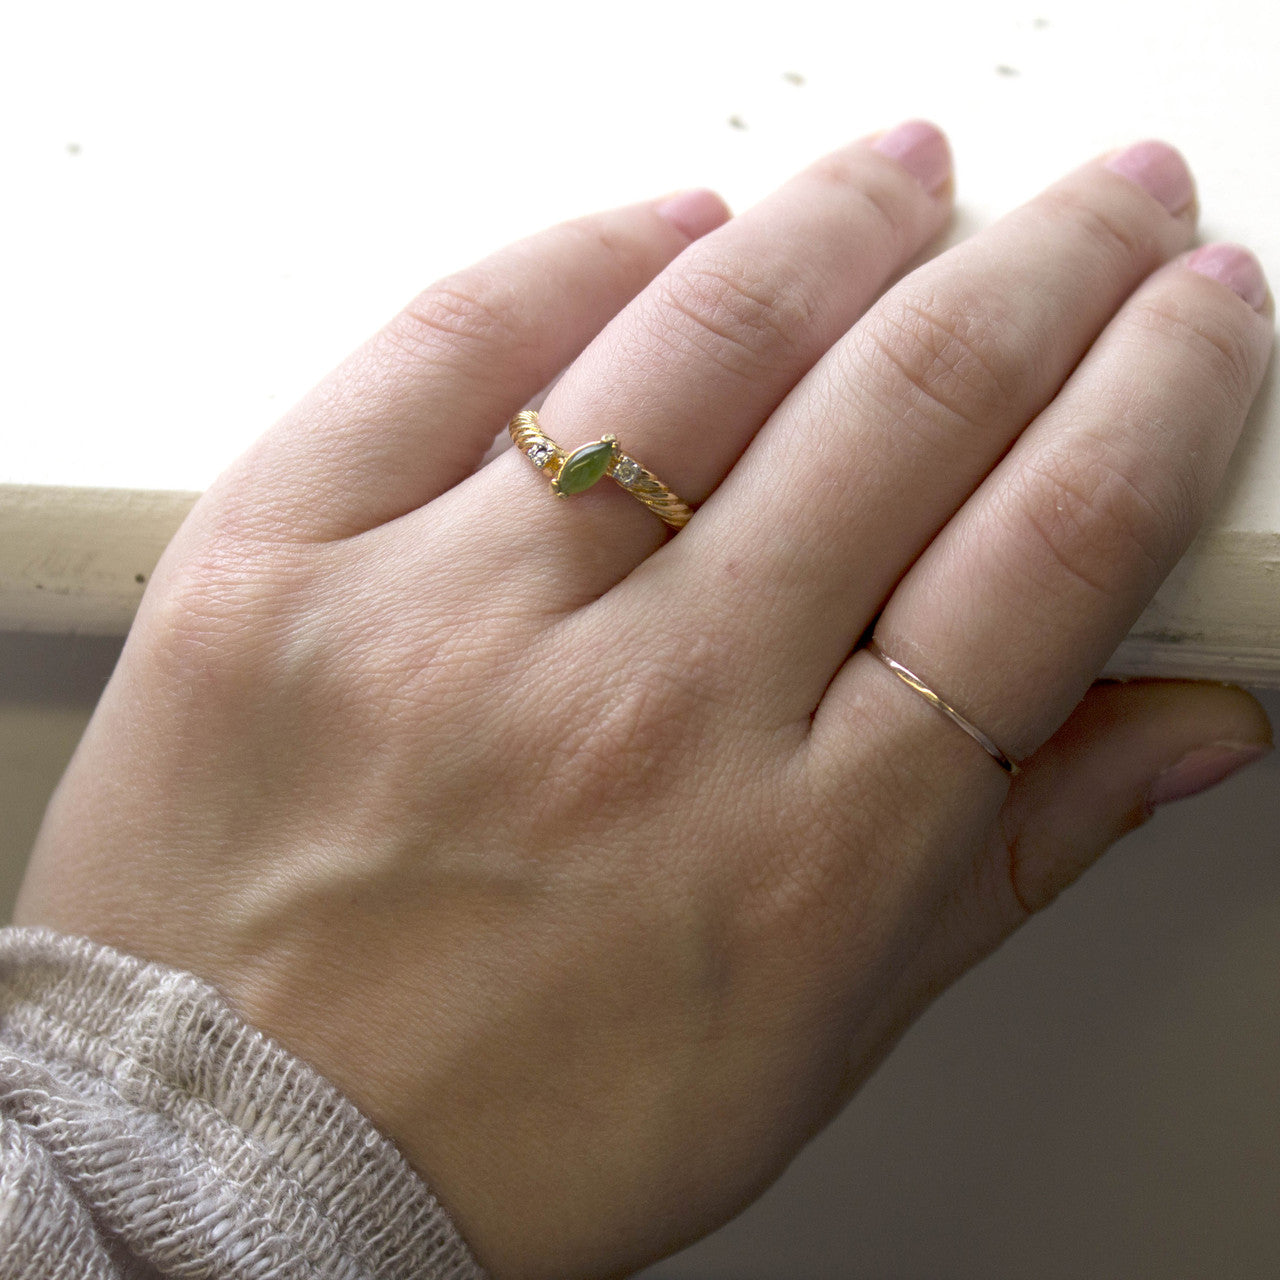 Vintage Genuine Jade Ring - Clear Austrian Crystals - 18k Yellow Gold Electroplated - Made in USA